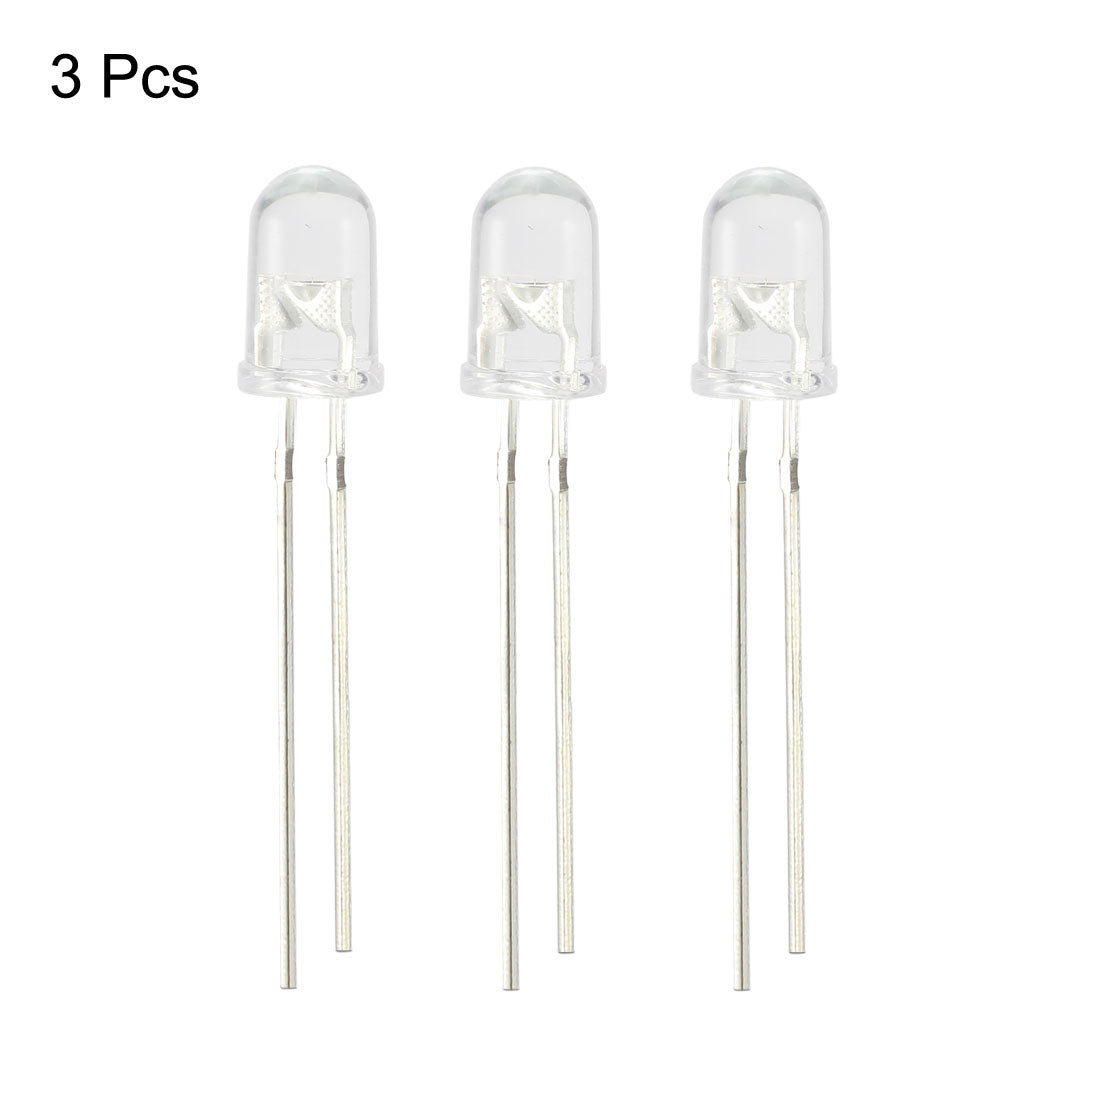 Uxcell Uxcell 3pcs 3mm 365-370nm Light Emitting Diode DC 3.4V 20mA Clear Round Purple